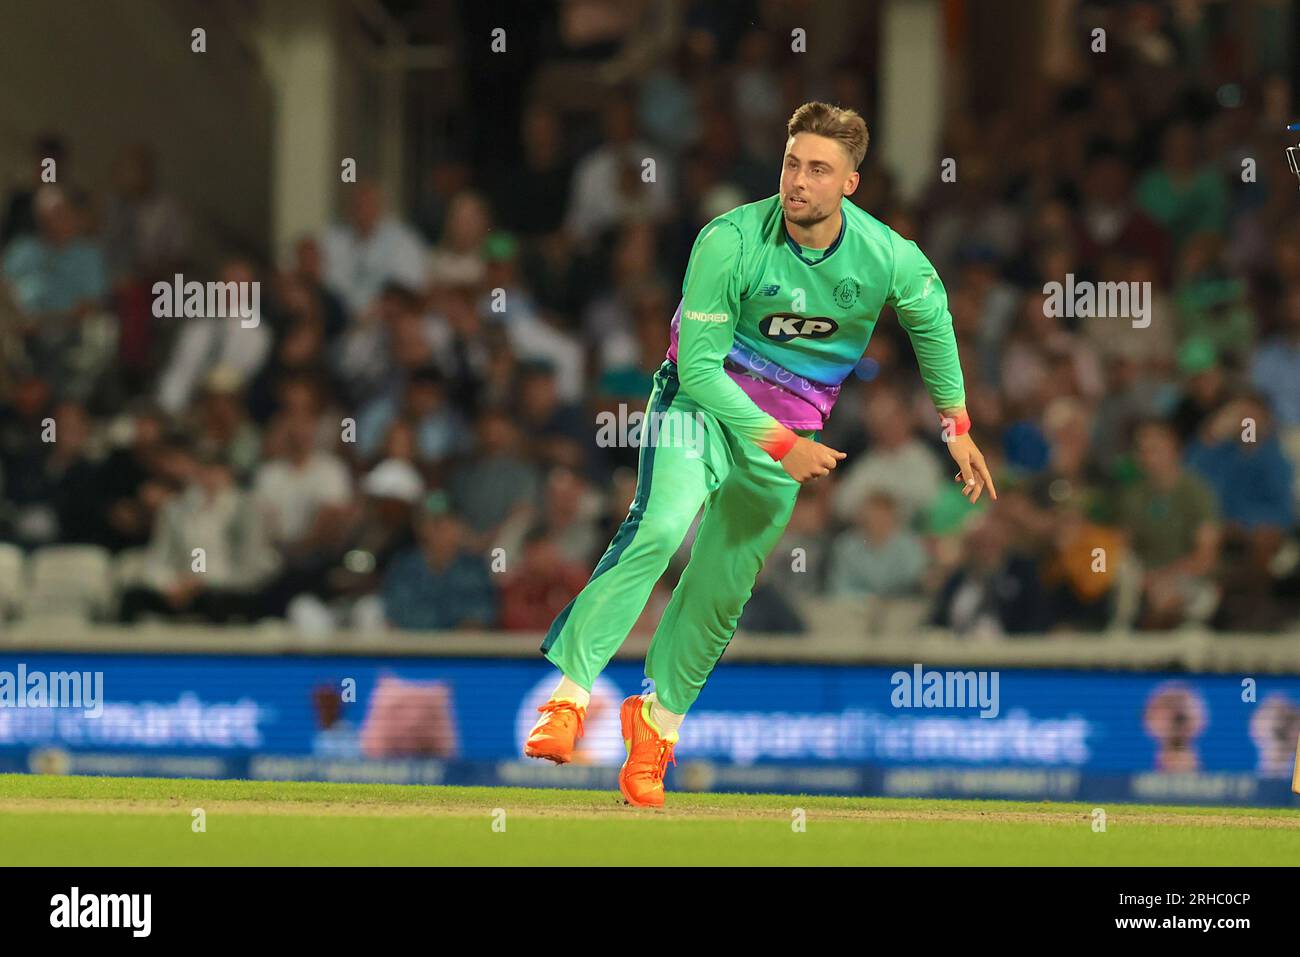 London, UK. 15th Aug, 2023. Will Jacks of The Oval Invincibles bowling as Oval Invincibles take on the London Spirit in The Hundred women's competition at The Kia Oval. Credit: David Rowe/Alamy Live News Stock Photo